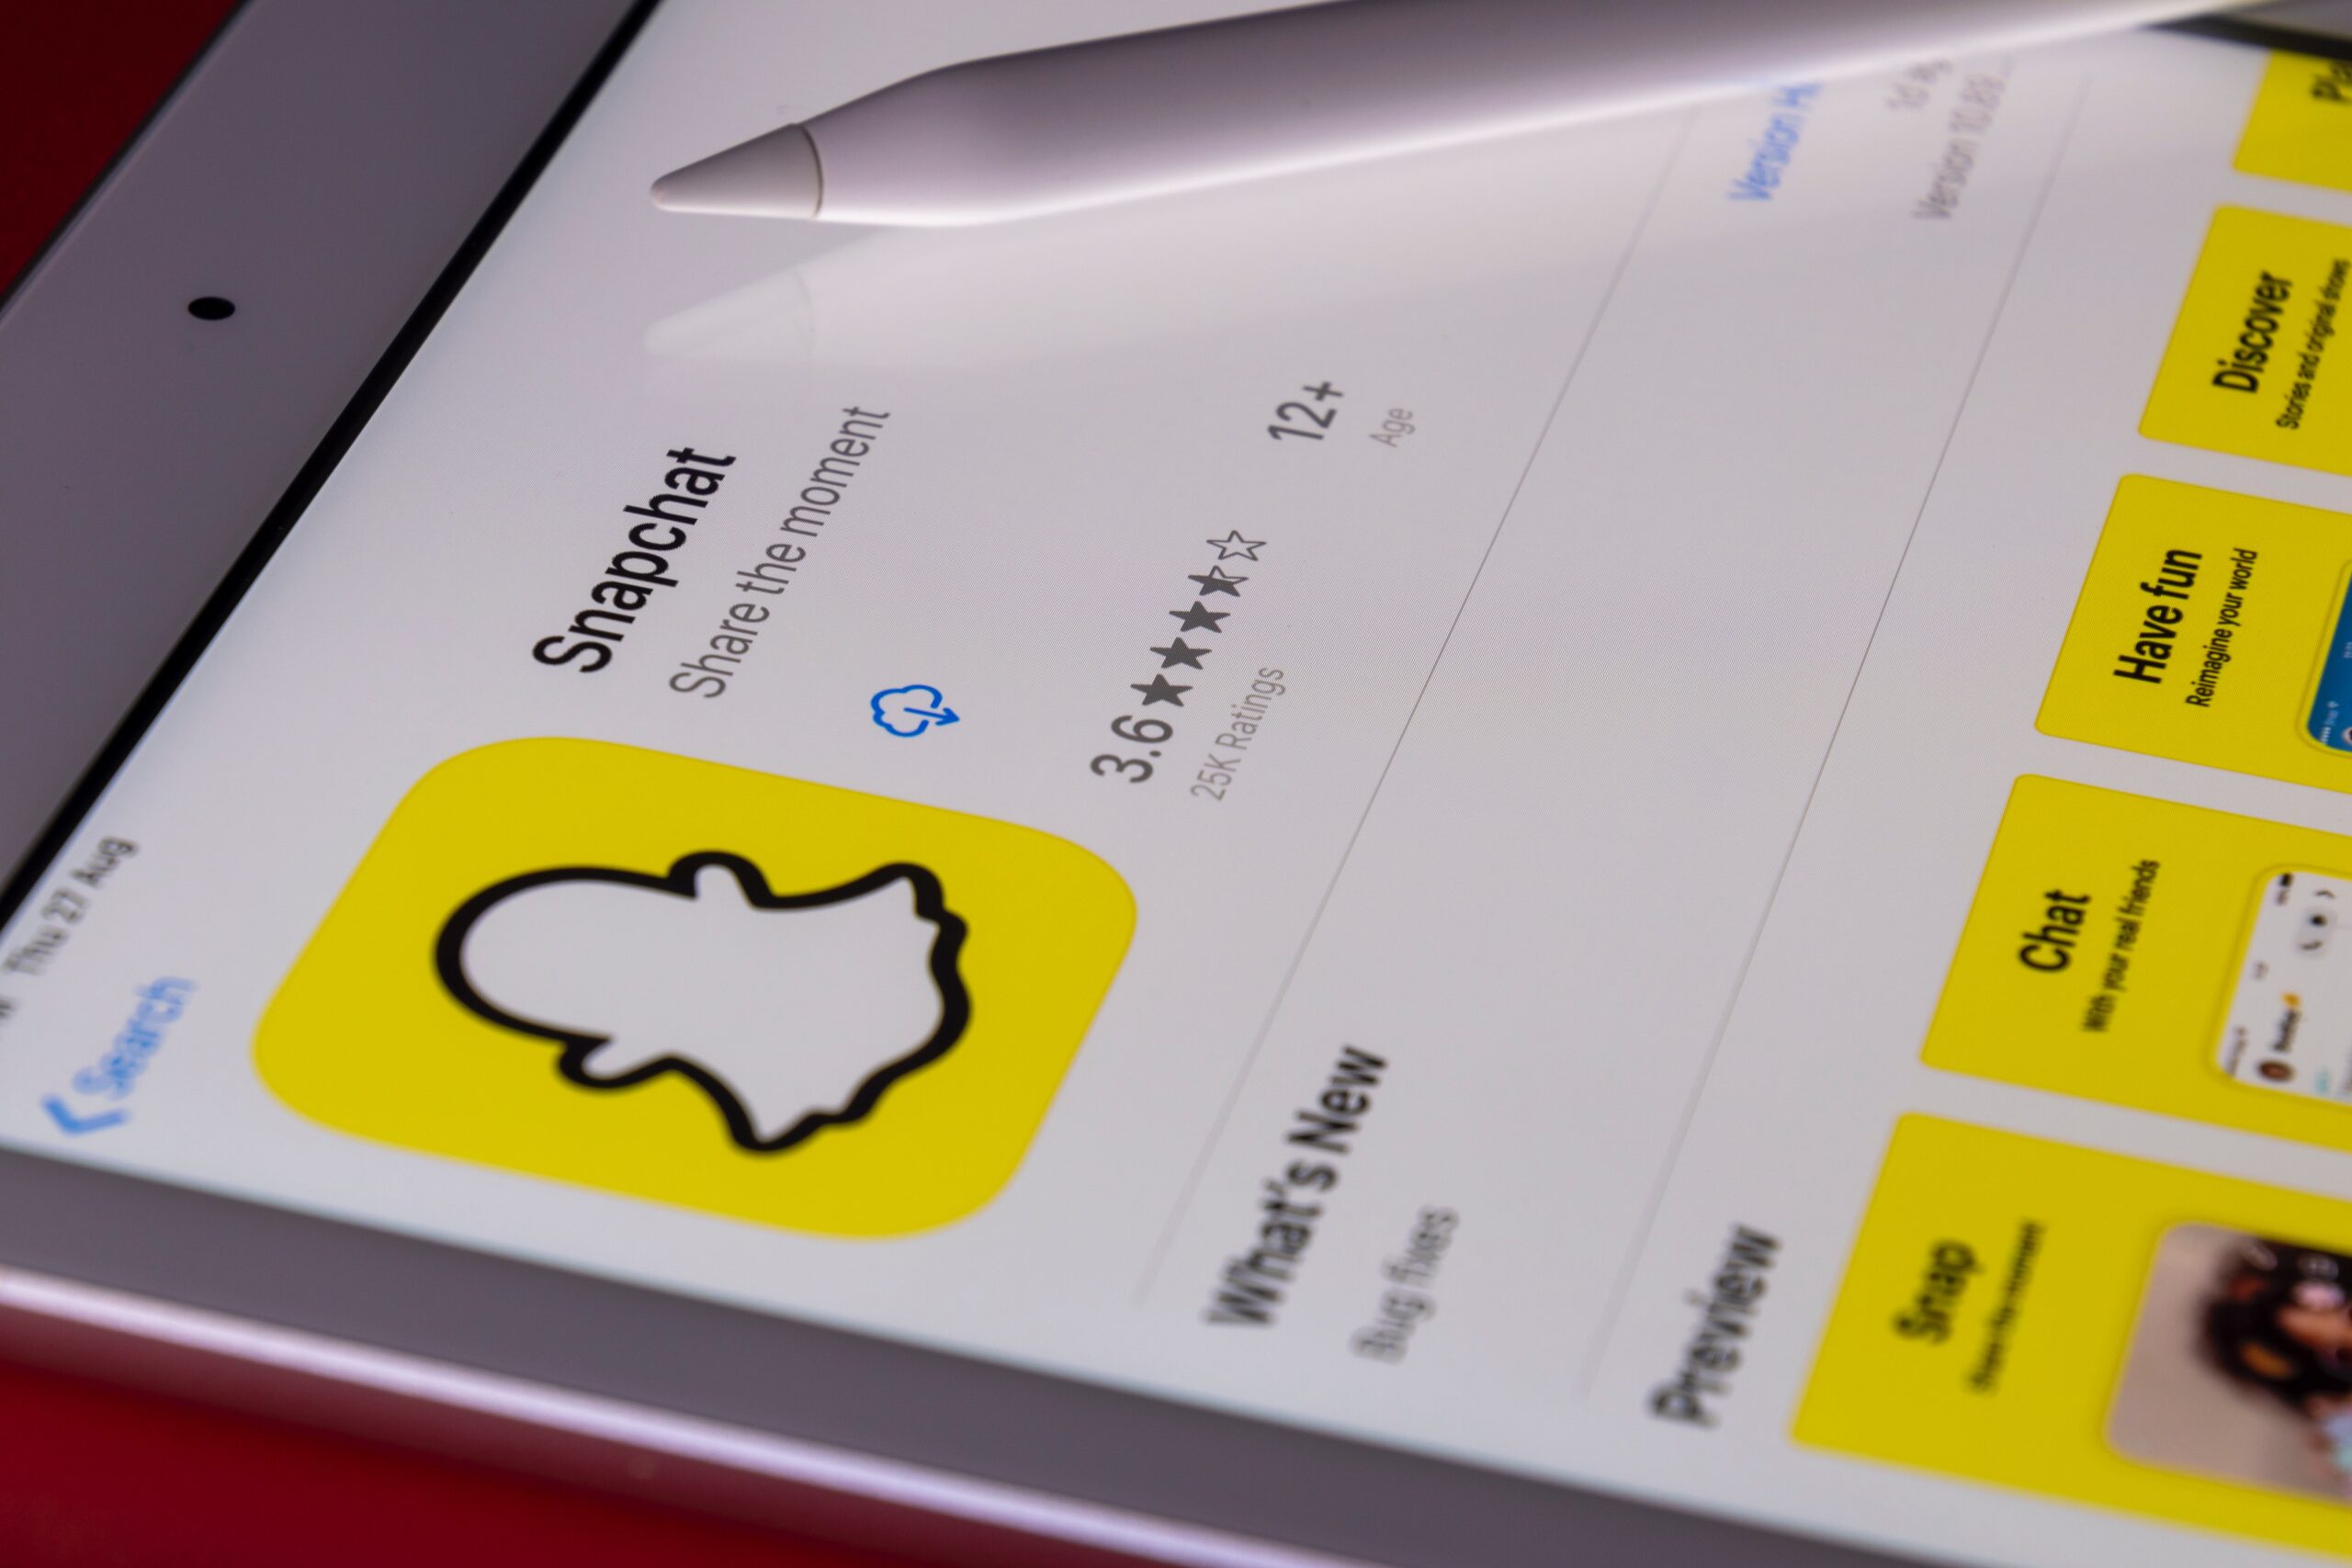 What Does WSP Stand For in Snapchat?